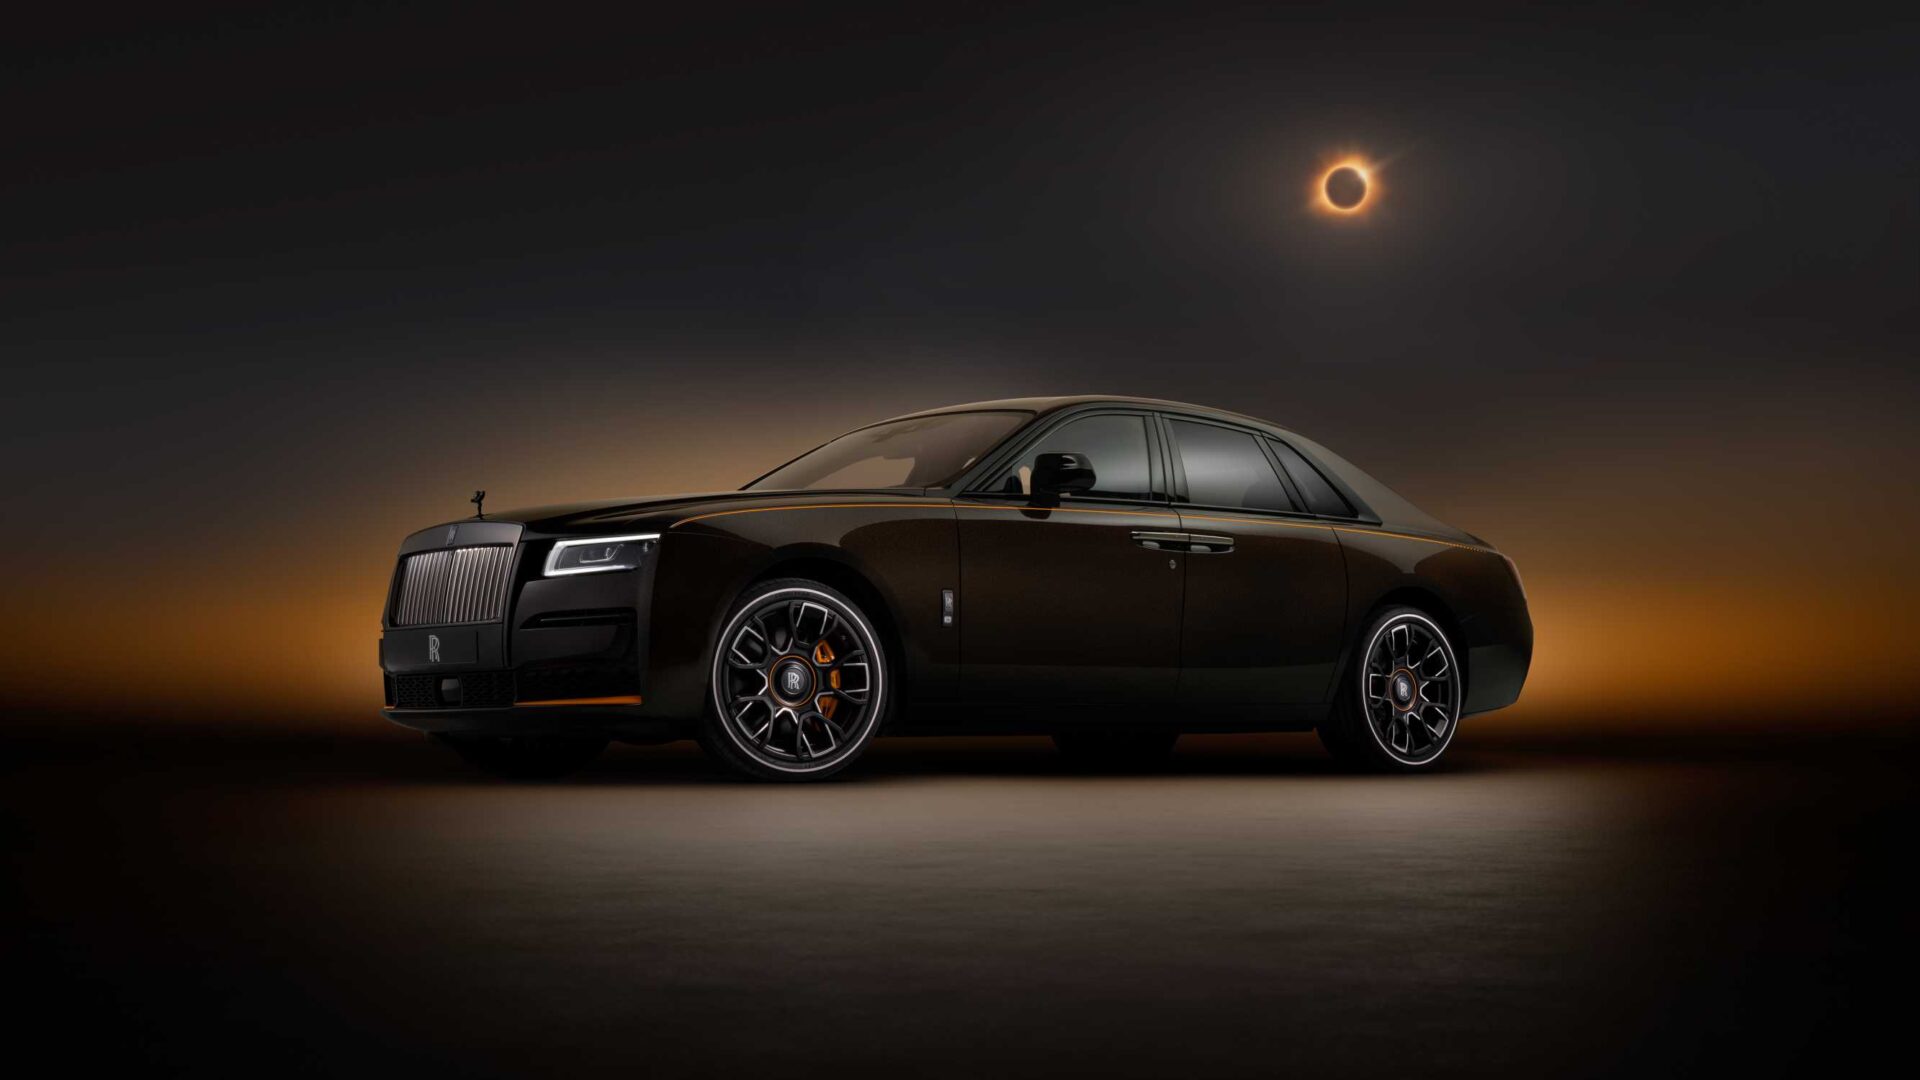 Another Side View of Rolls Royce Black Badge Ghost